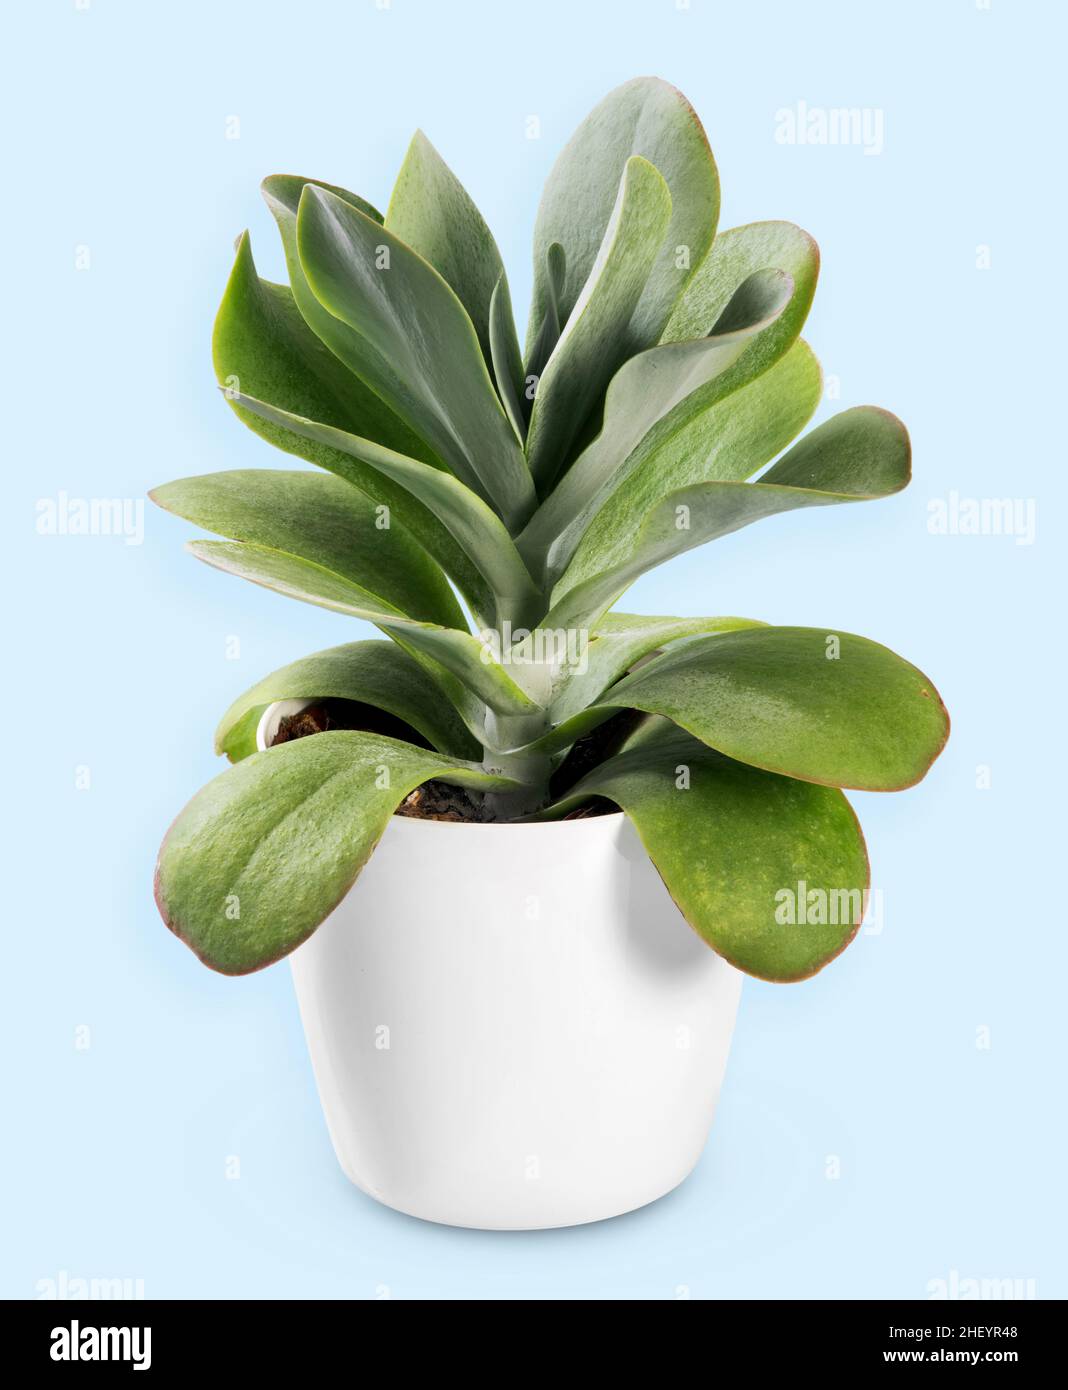 Green Kalanchoe thyrsiflora succulent plant growing in white ceramic flowerpot placed in studio against light blue background Stock Photo